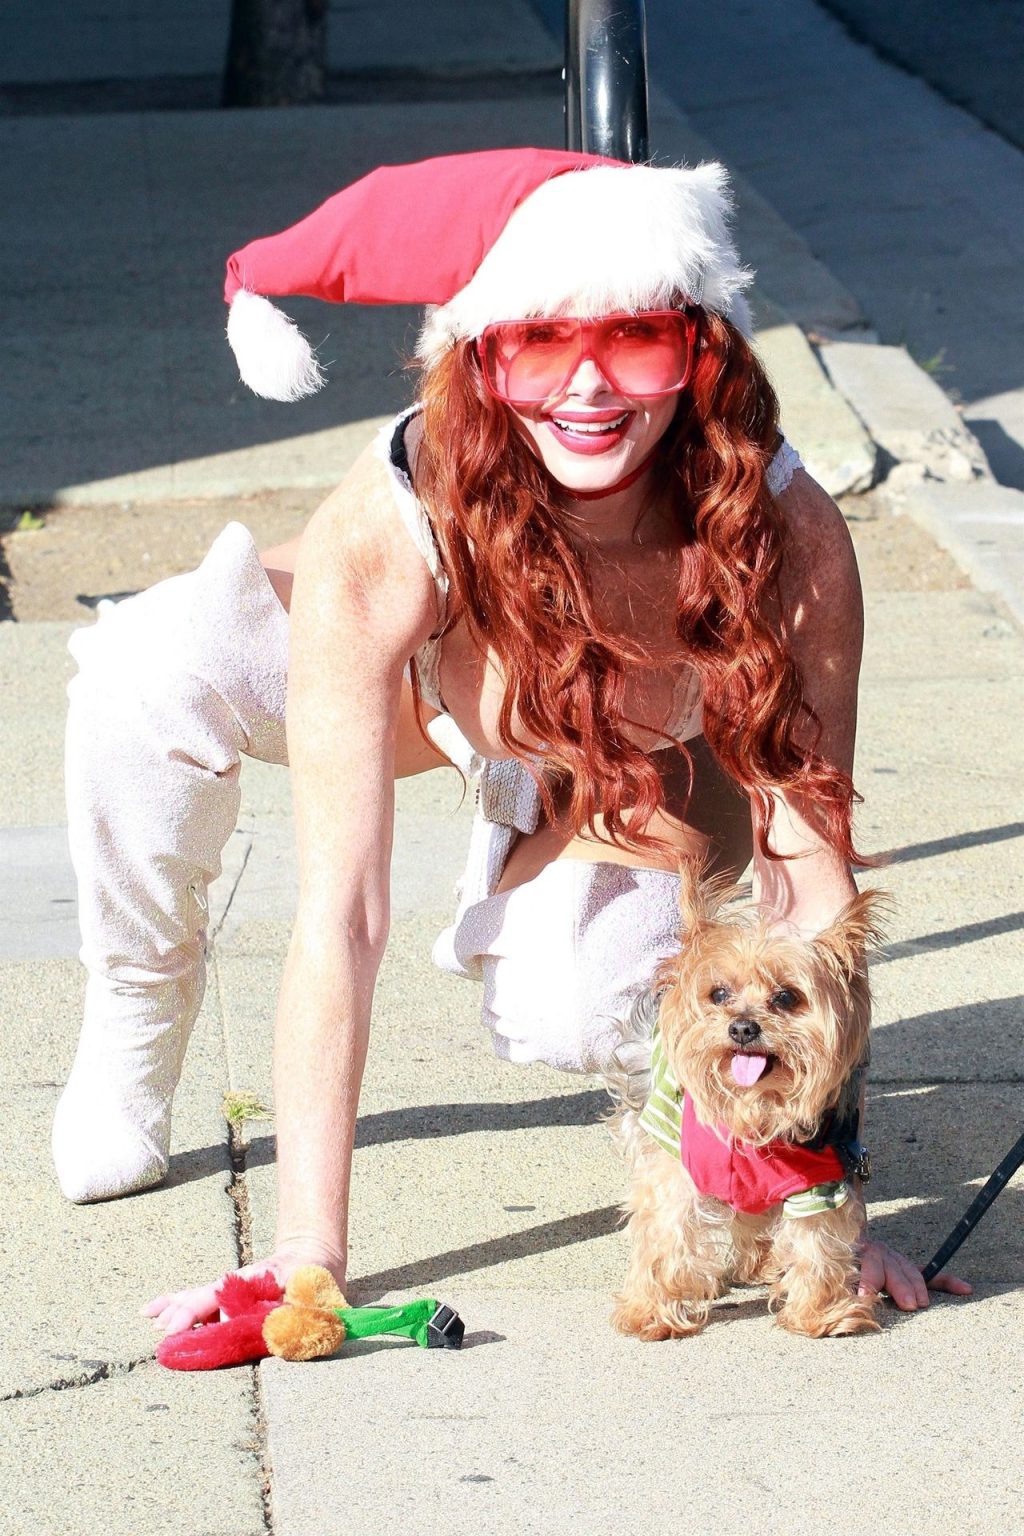 Phoebe Price is Seen in the Spirit for the Holidays (41 Photos)